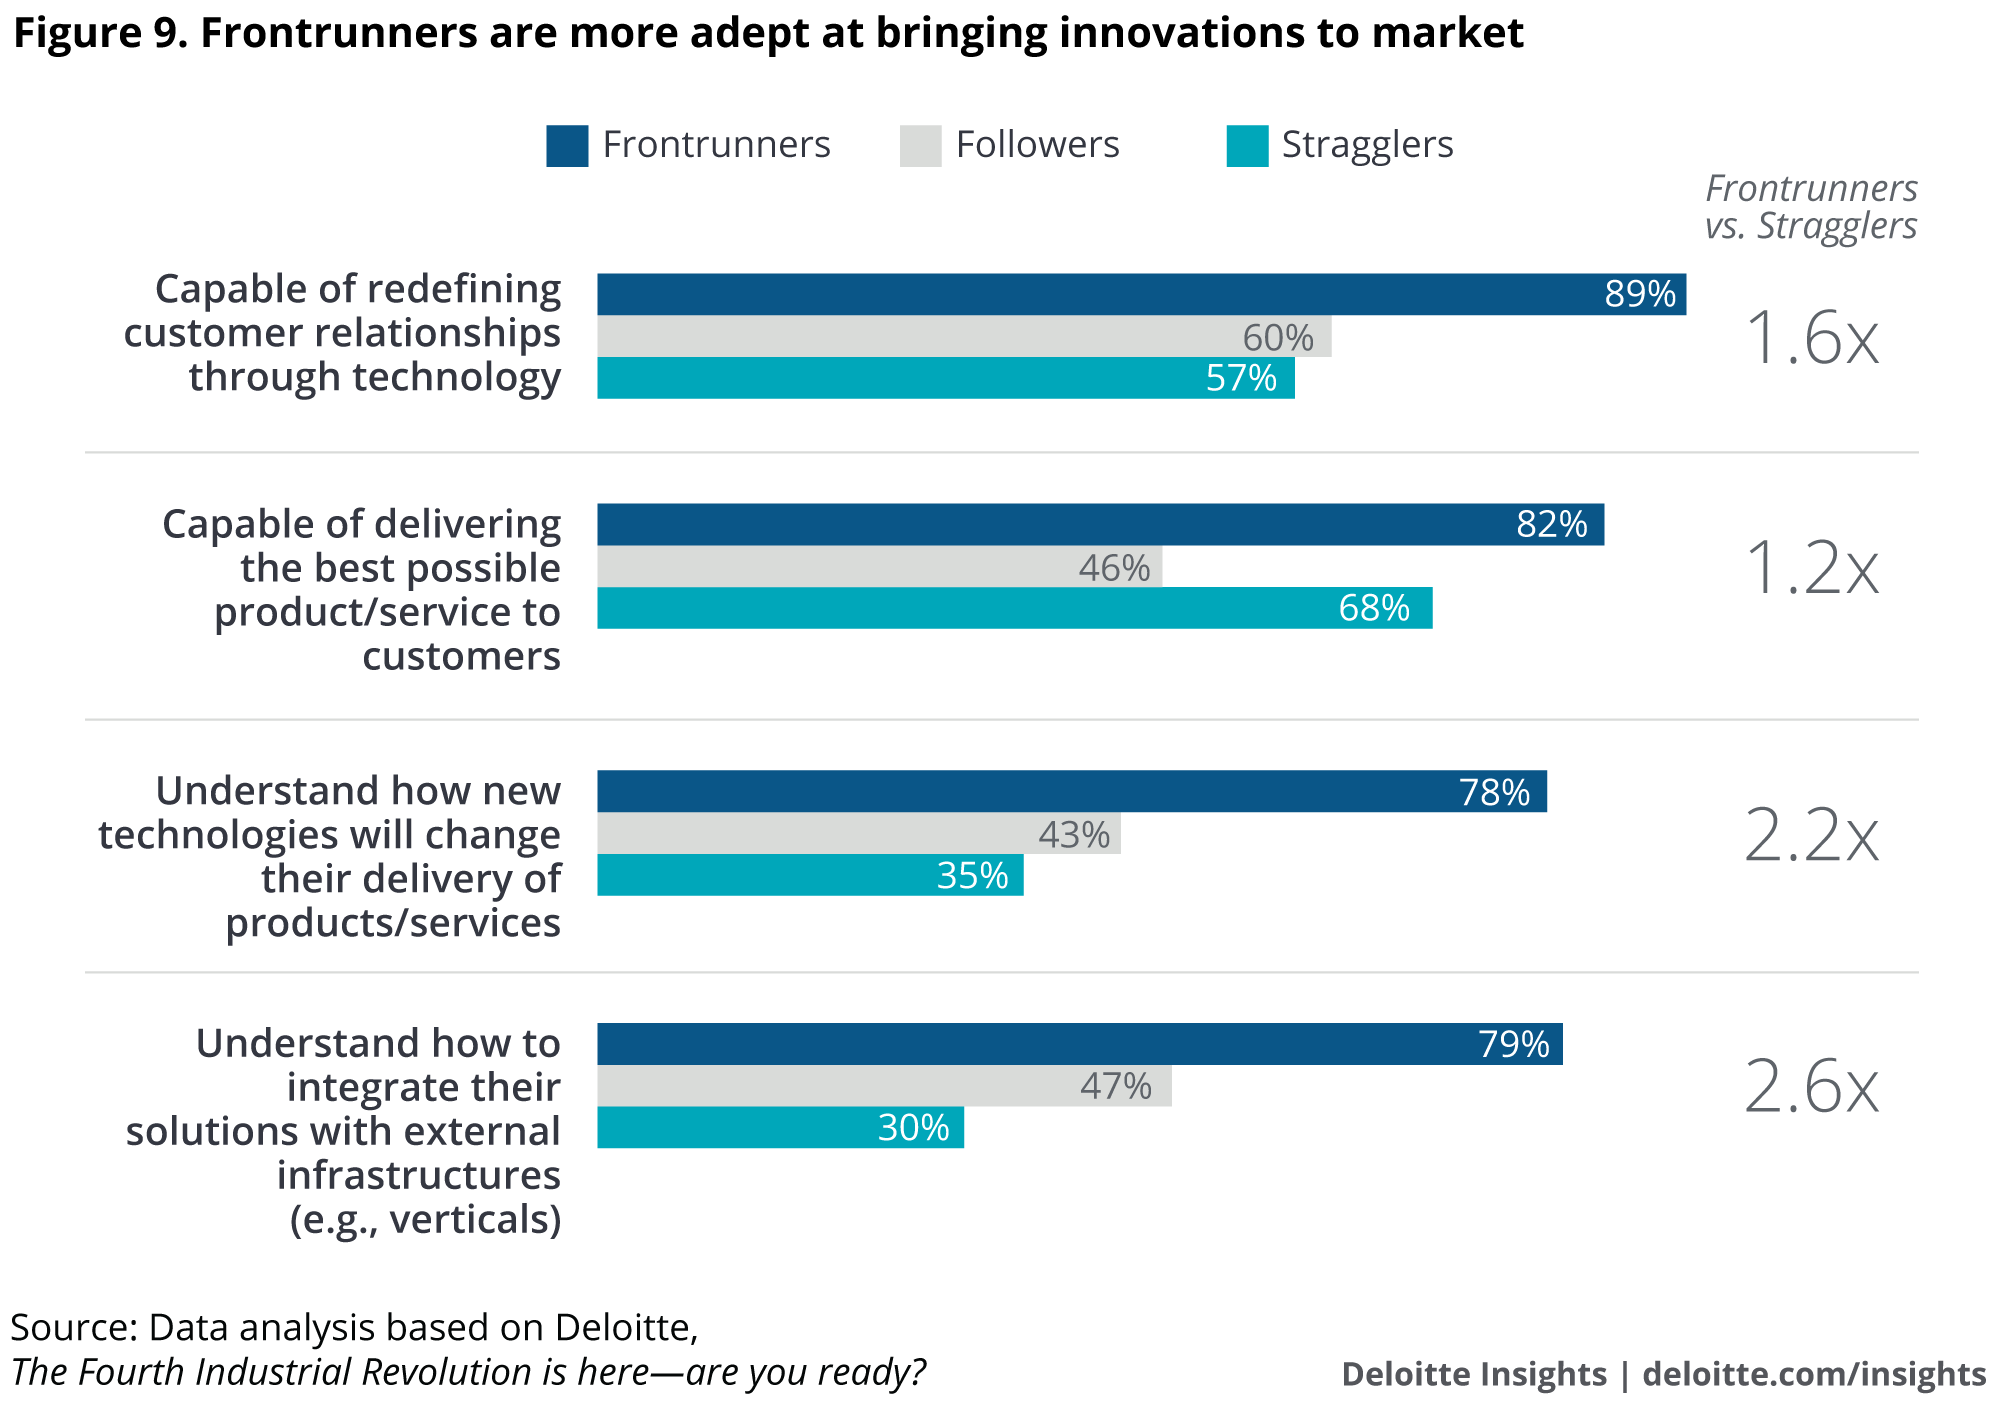 Frontrunners are more adept at bringing innovations to market